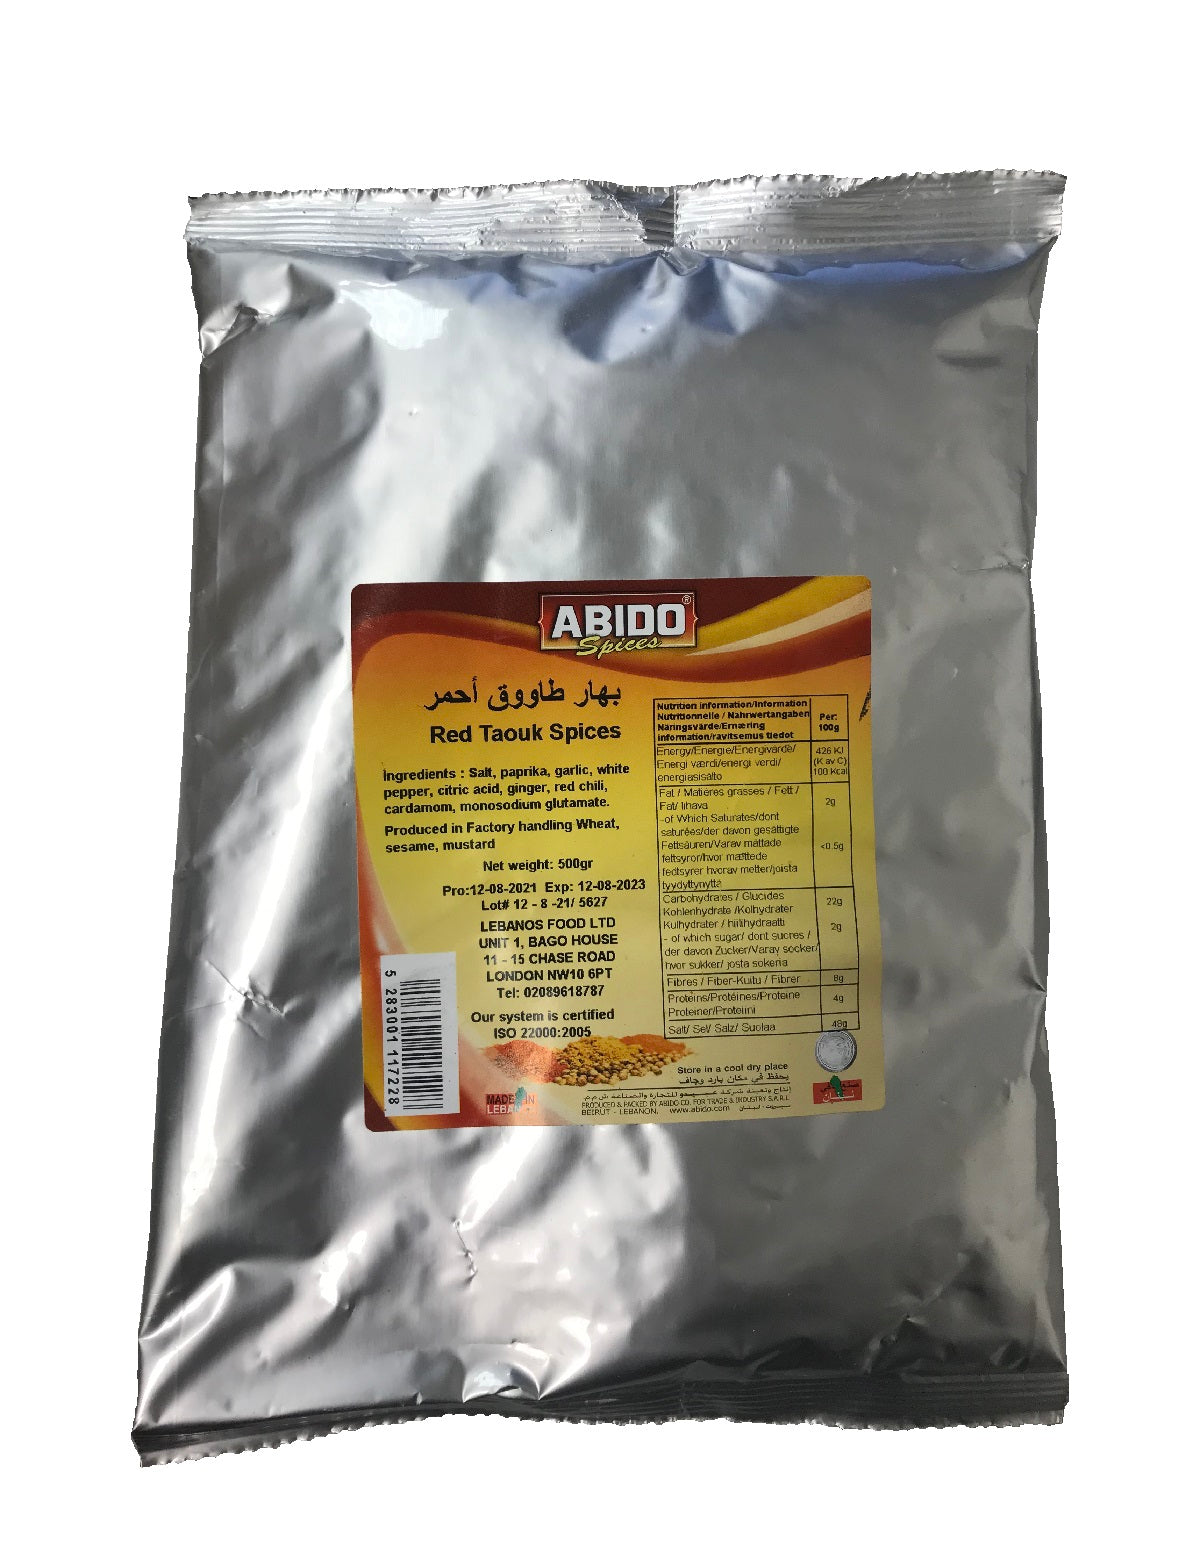 Red Taouk Spices Abido 500g